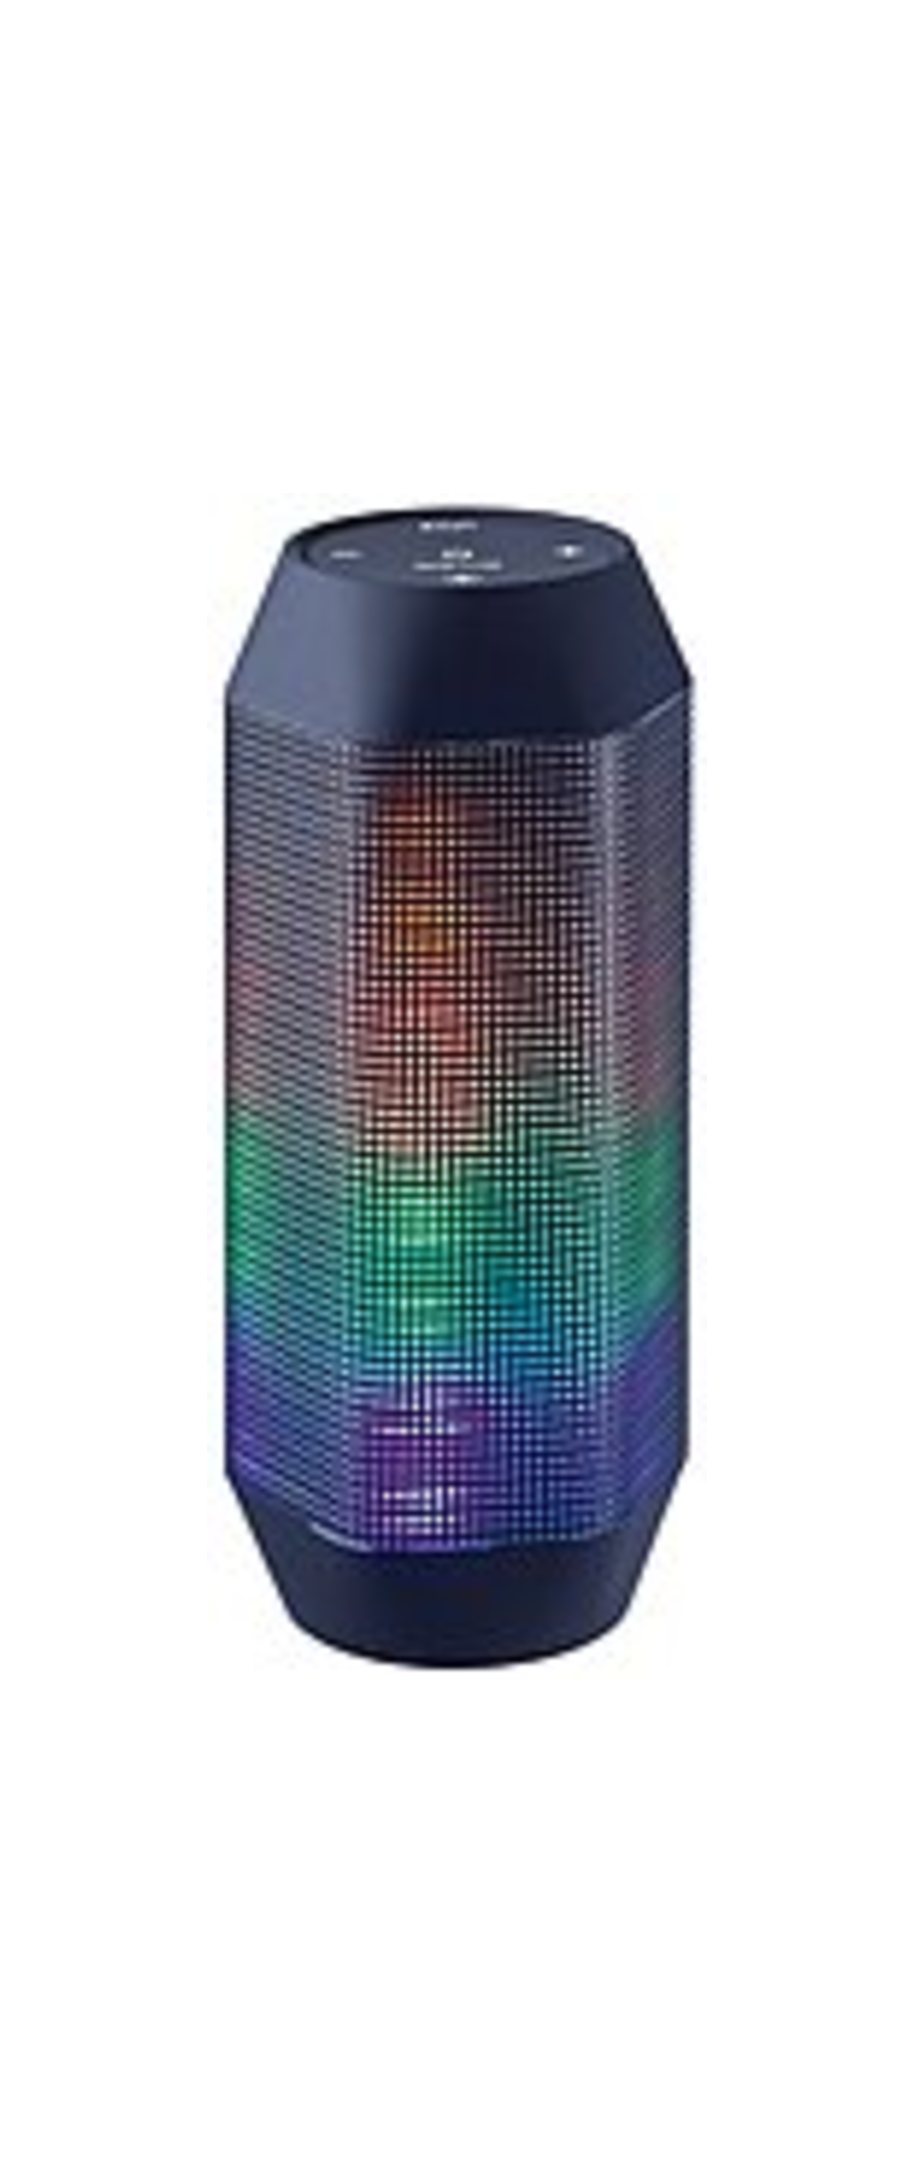 Craig Electronics CMA3594 Stereo Portable Bluetooth Speaker with Color Charging LED Lights - Black